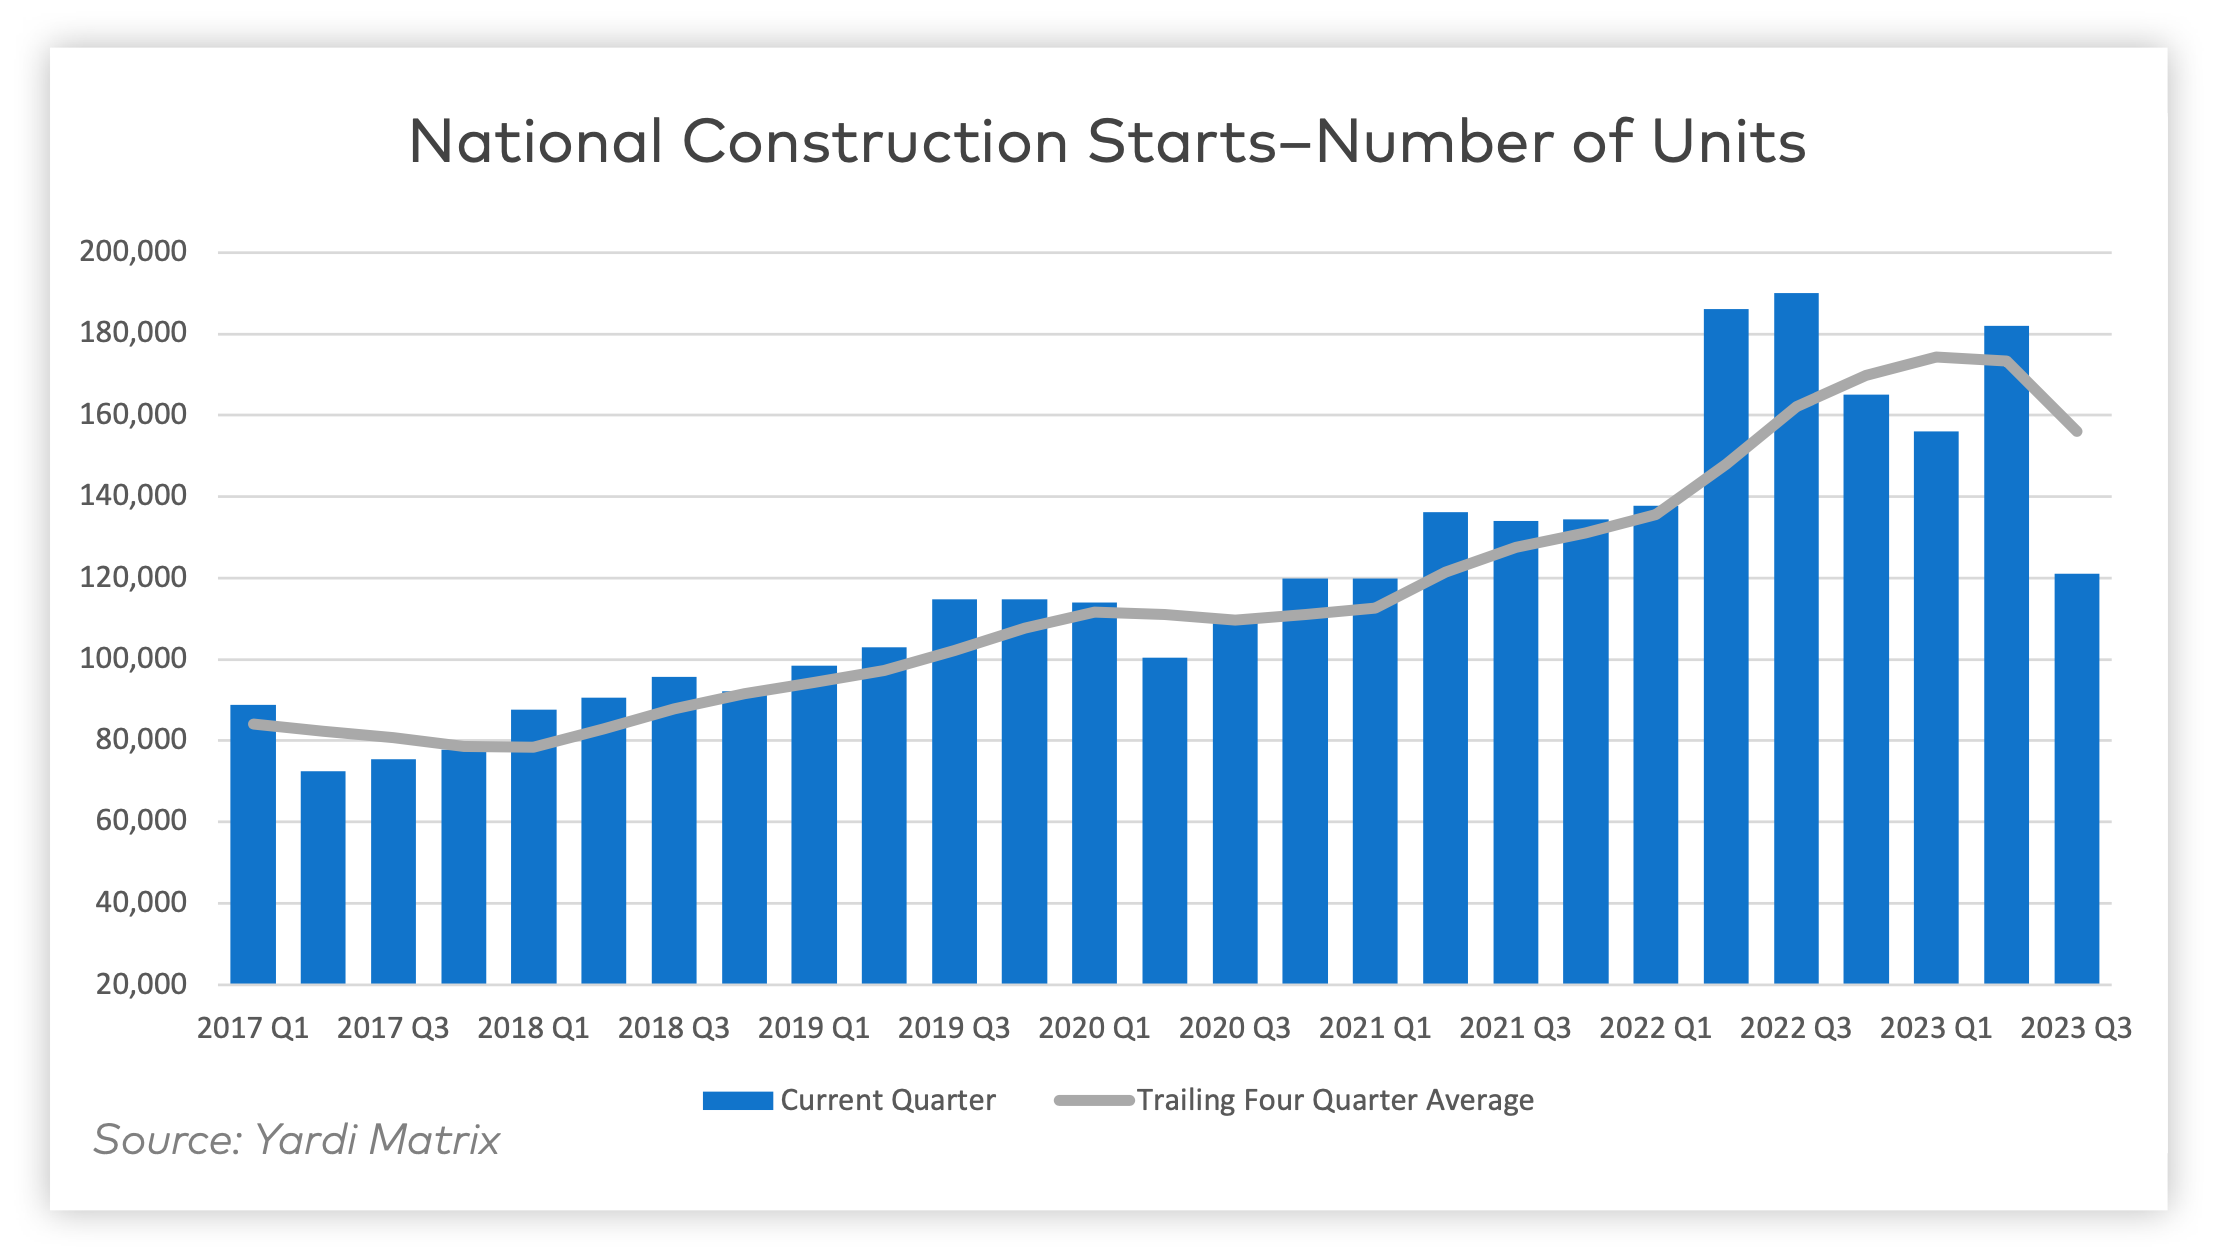 National Construction Starts by number of units since 2017